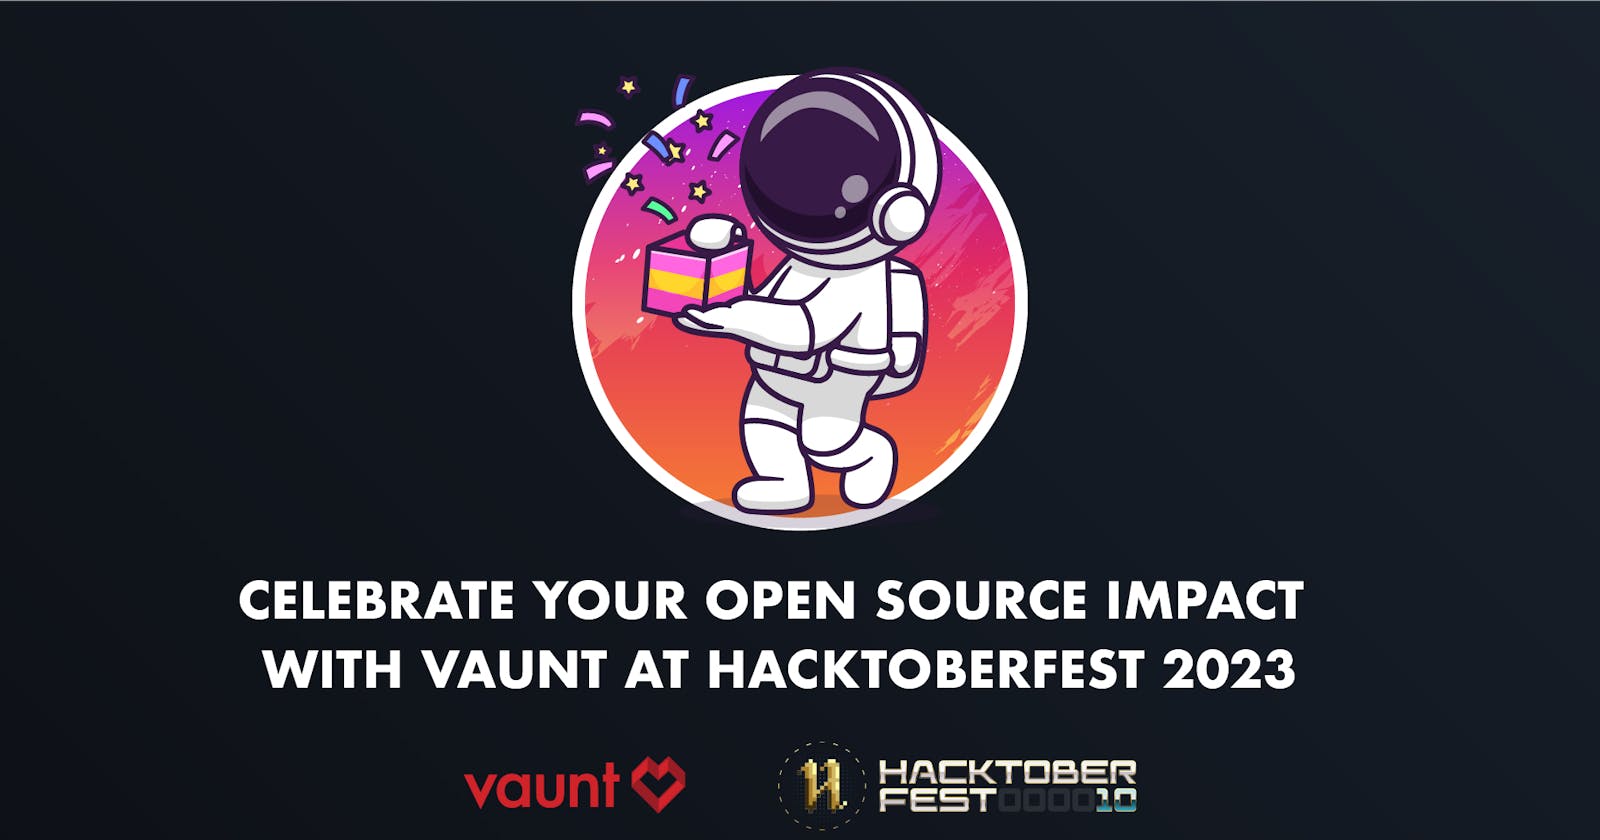 Celebrate Your Open Source Impact with Vaunt during Hacktoberfest 2023